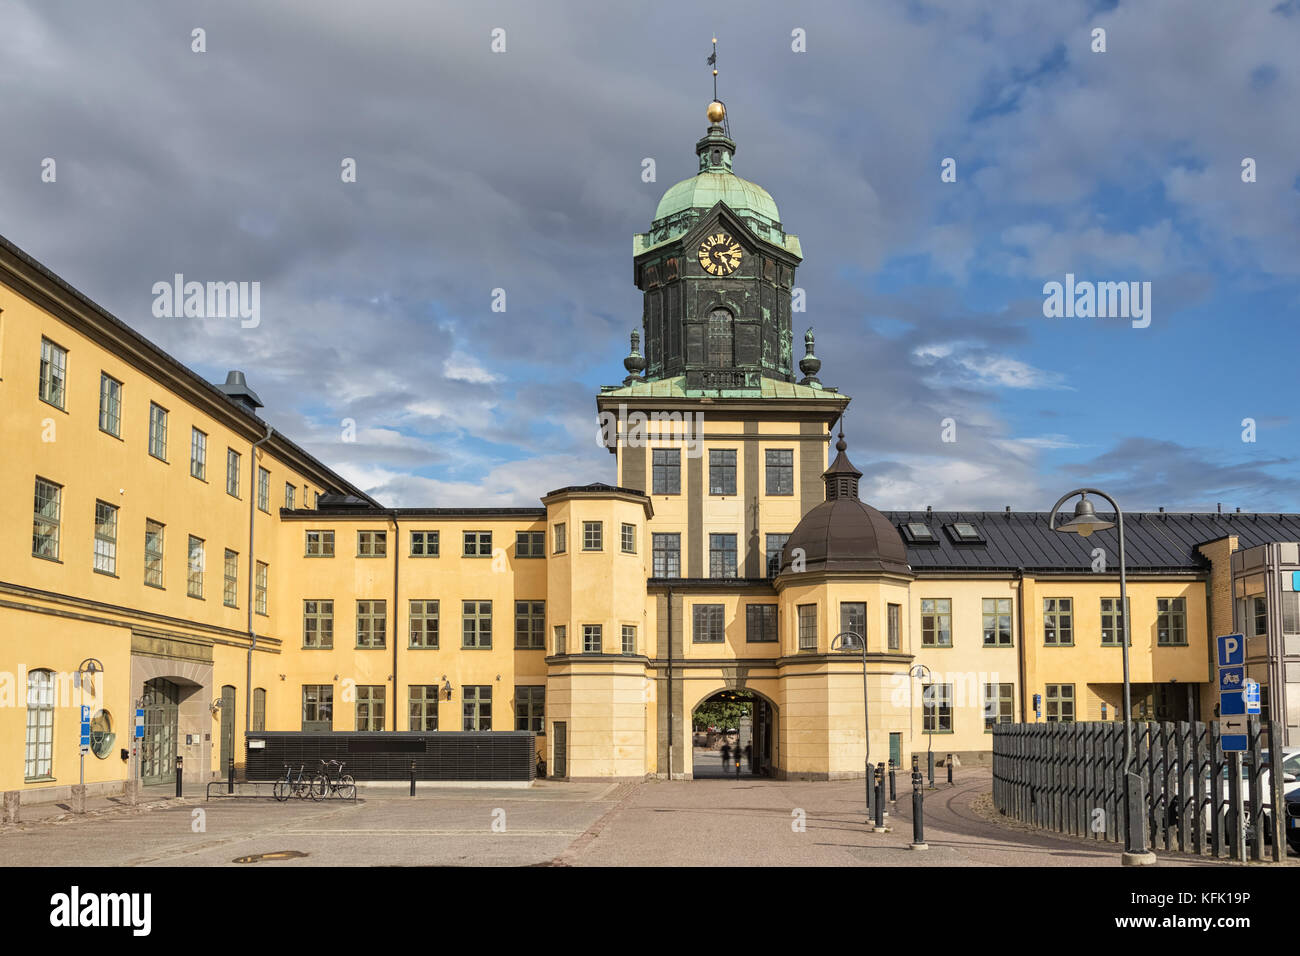 Holmentornet tower located in historical industrial area in central Norrkoping, Sweden Stock Photo